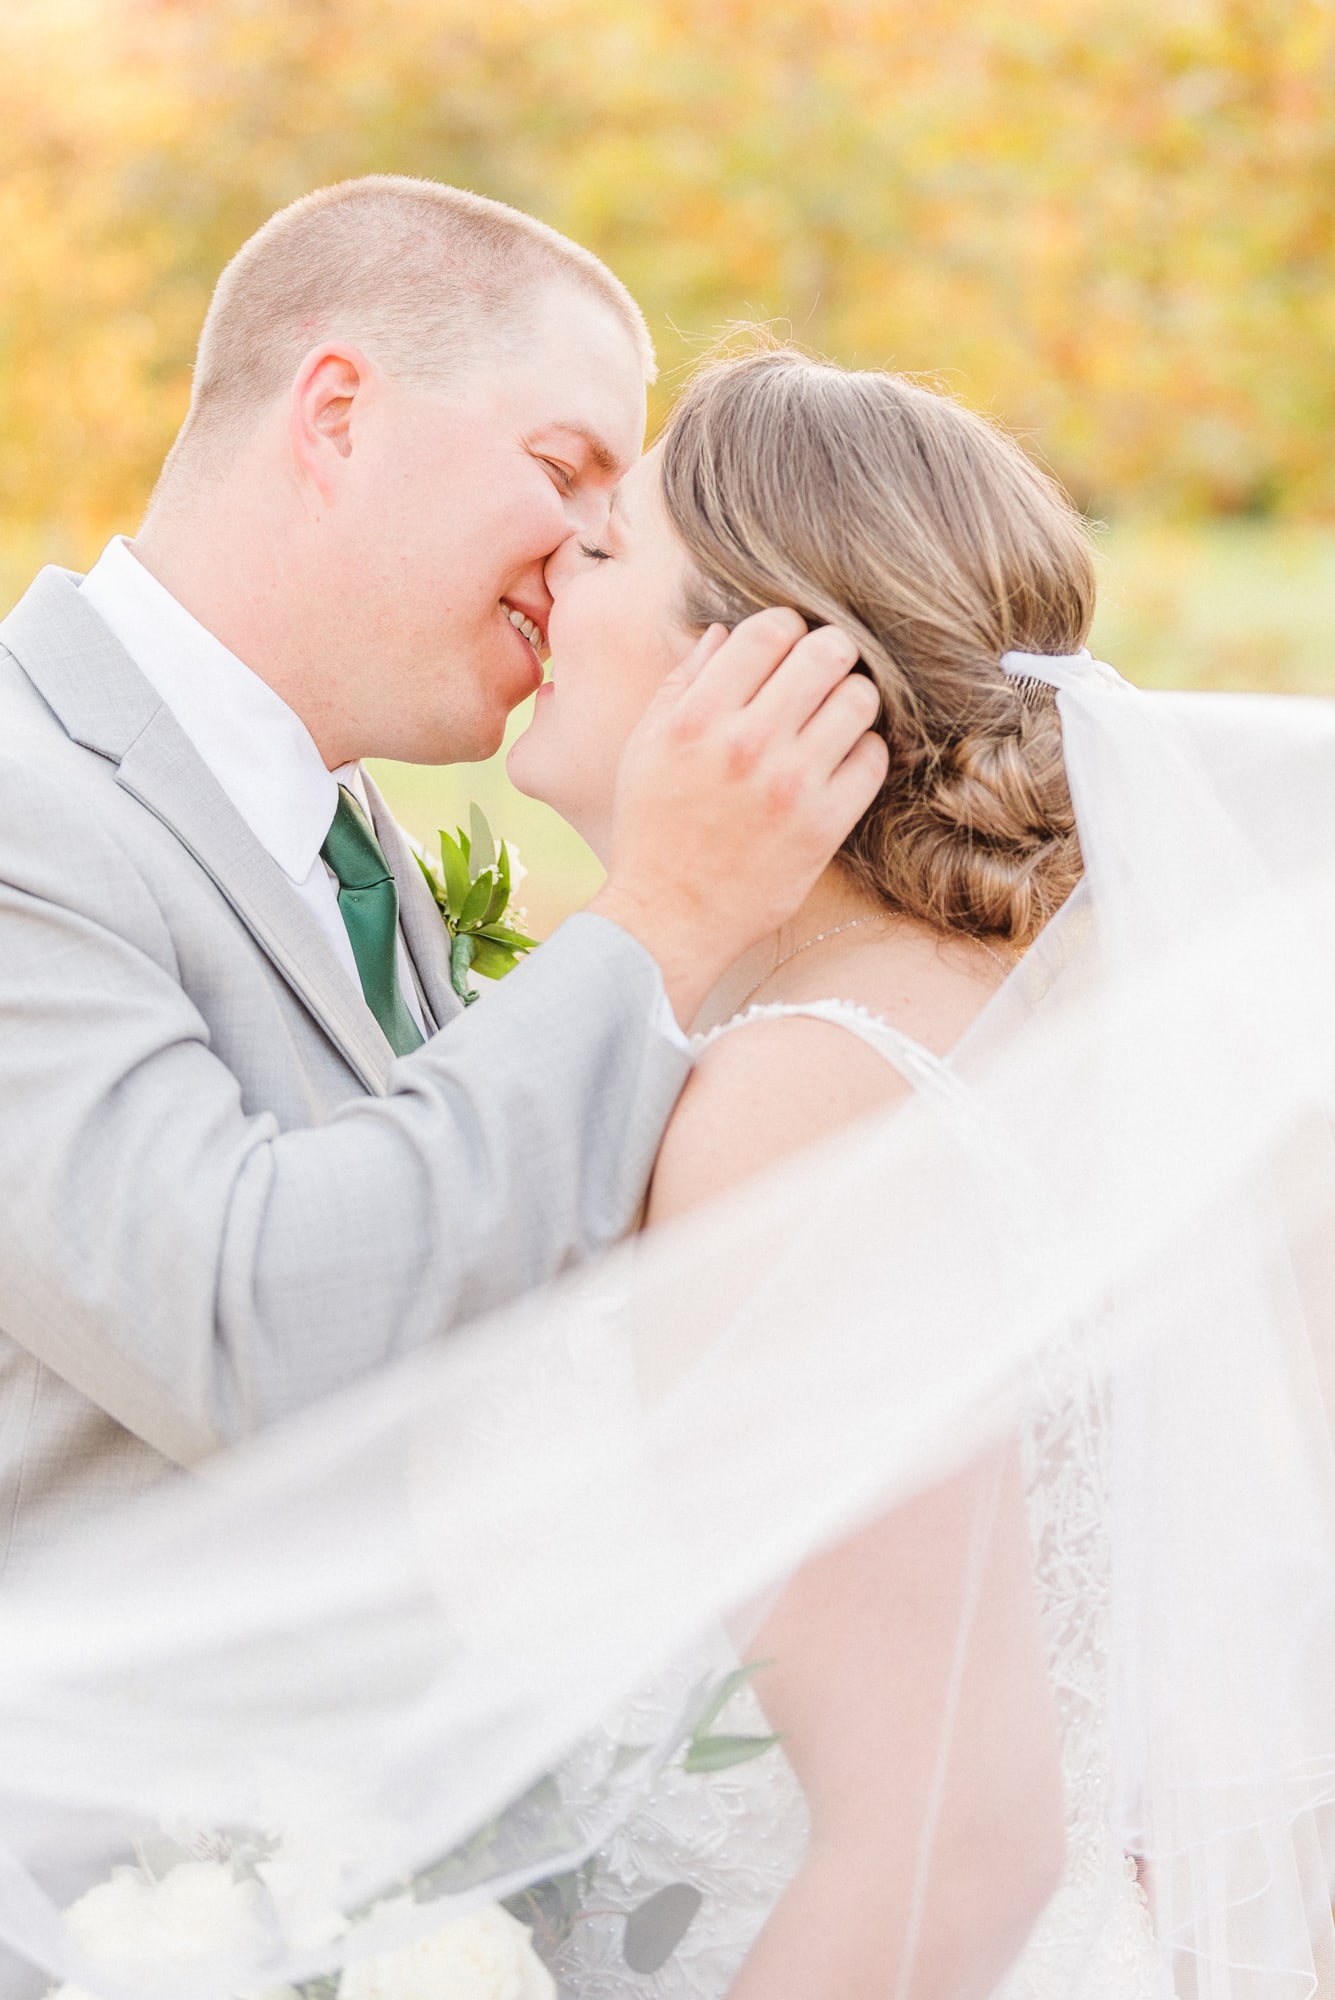 Katelynn and Alec kiss while their veil swirls around them on the grounds of the Low Meadows Estate wedding venue.